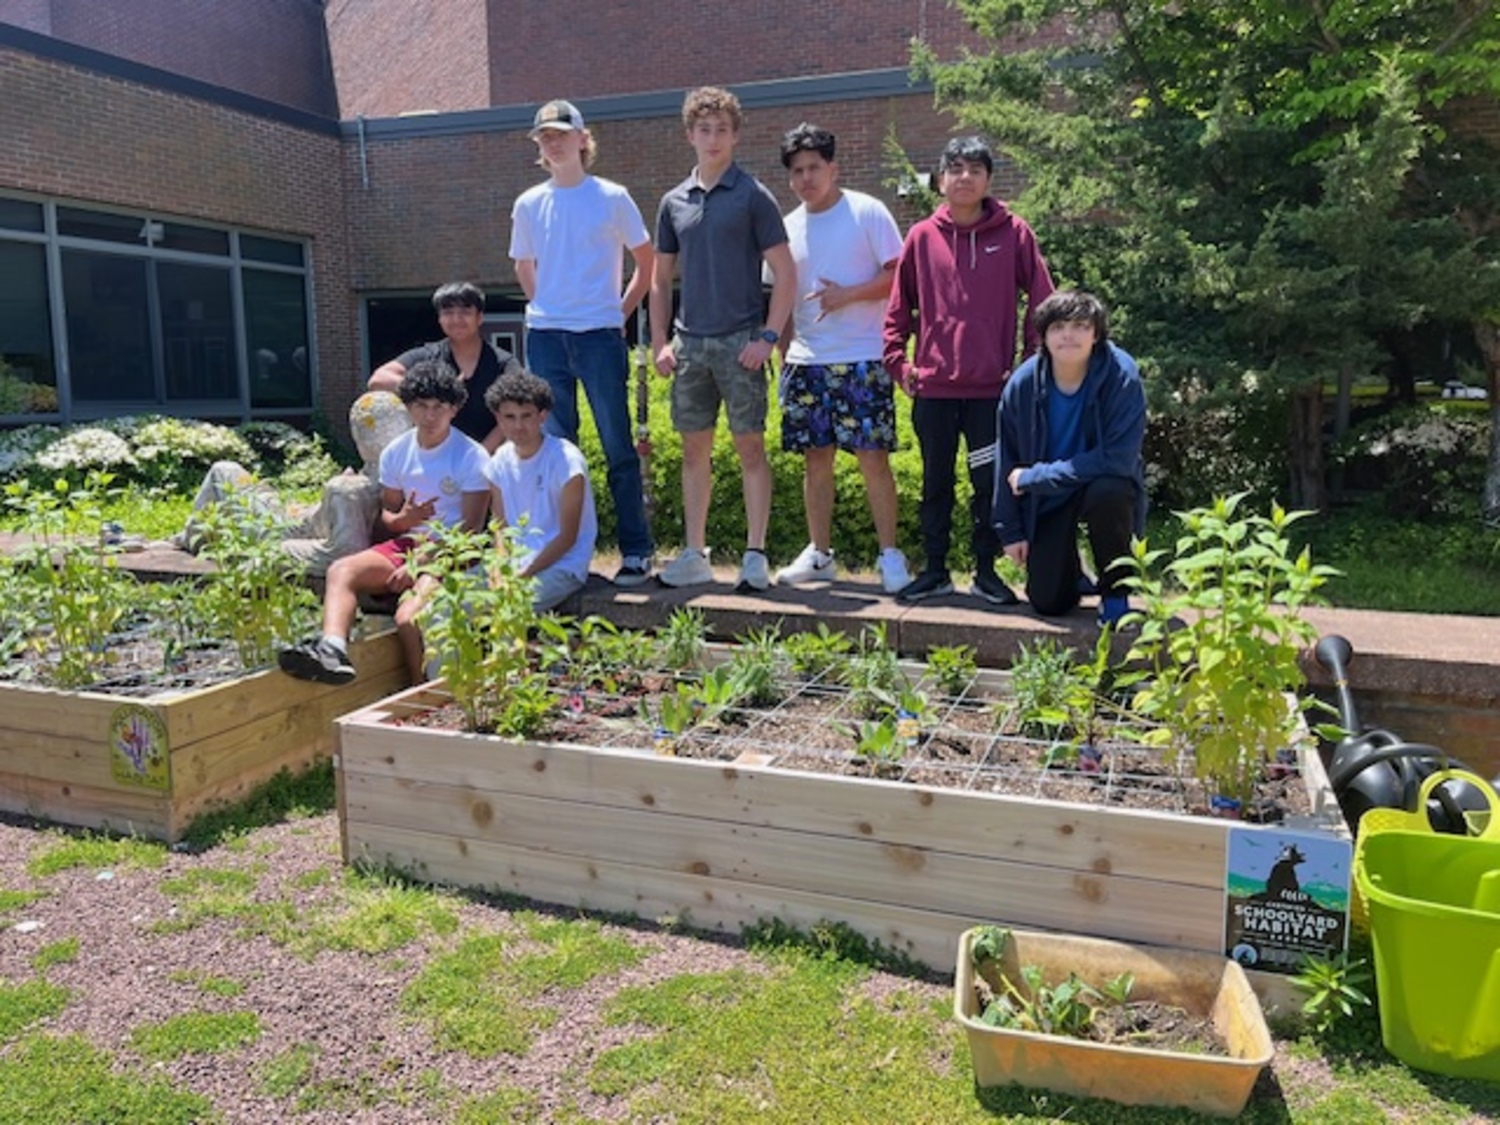 The Southampton High School Environmental Club has successfully transformed a section of the school grounds into a National Wildlife Federation Certified Wildlife Habitat, Monarch Watch Waystation and Xerces Society Pollinator Habitat. COURTESY SOUTHAMPTON SCHOOL DISTRICT